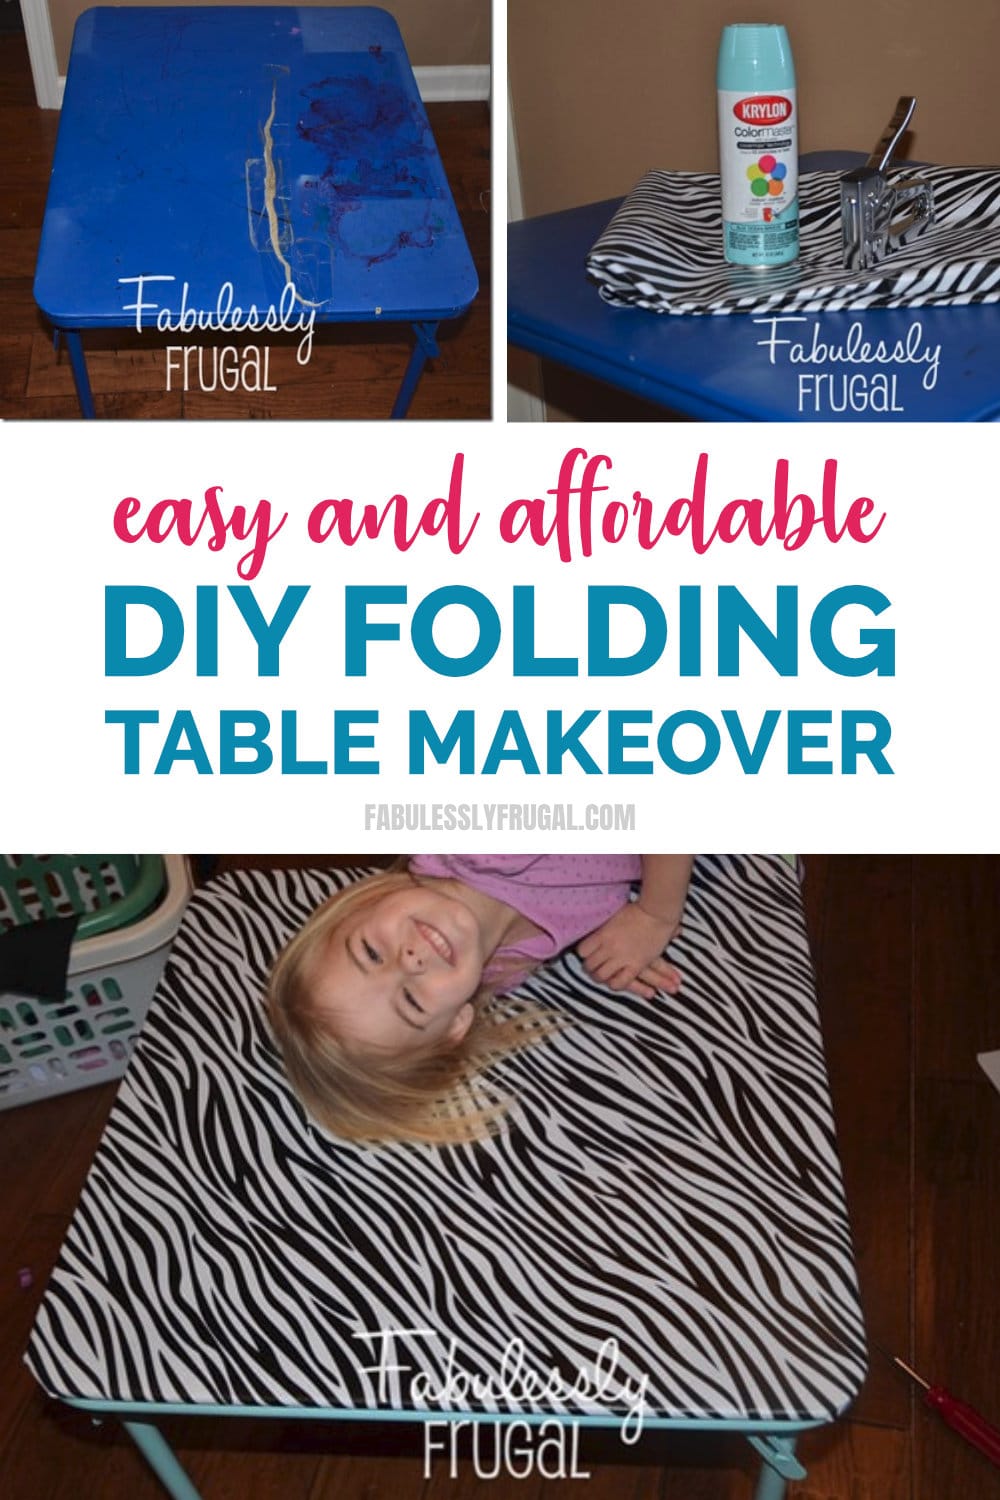 Easy and affordable DIY folding table makeover